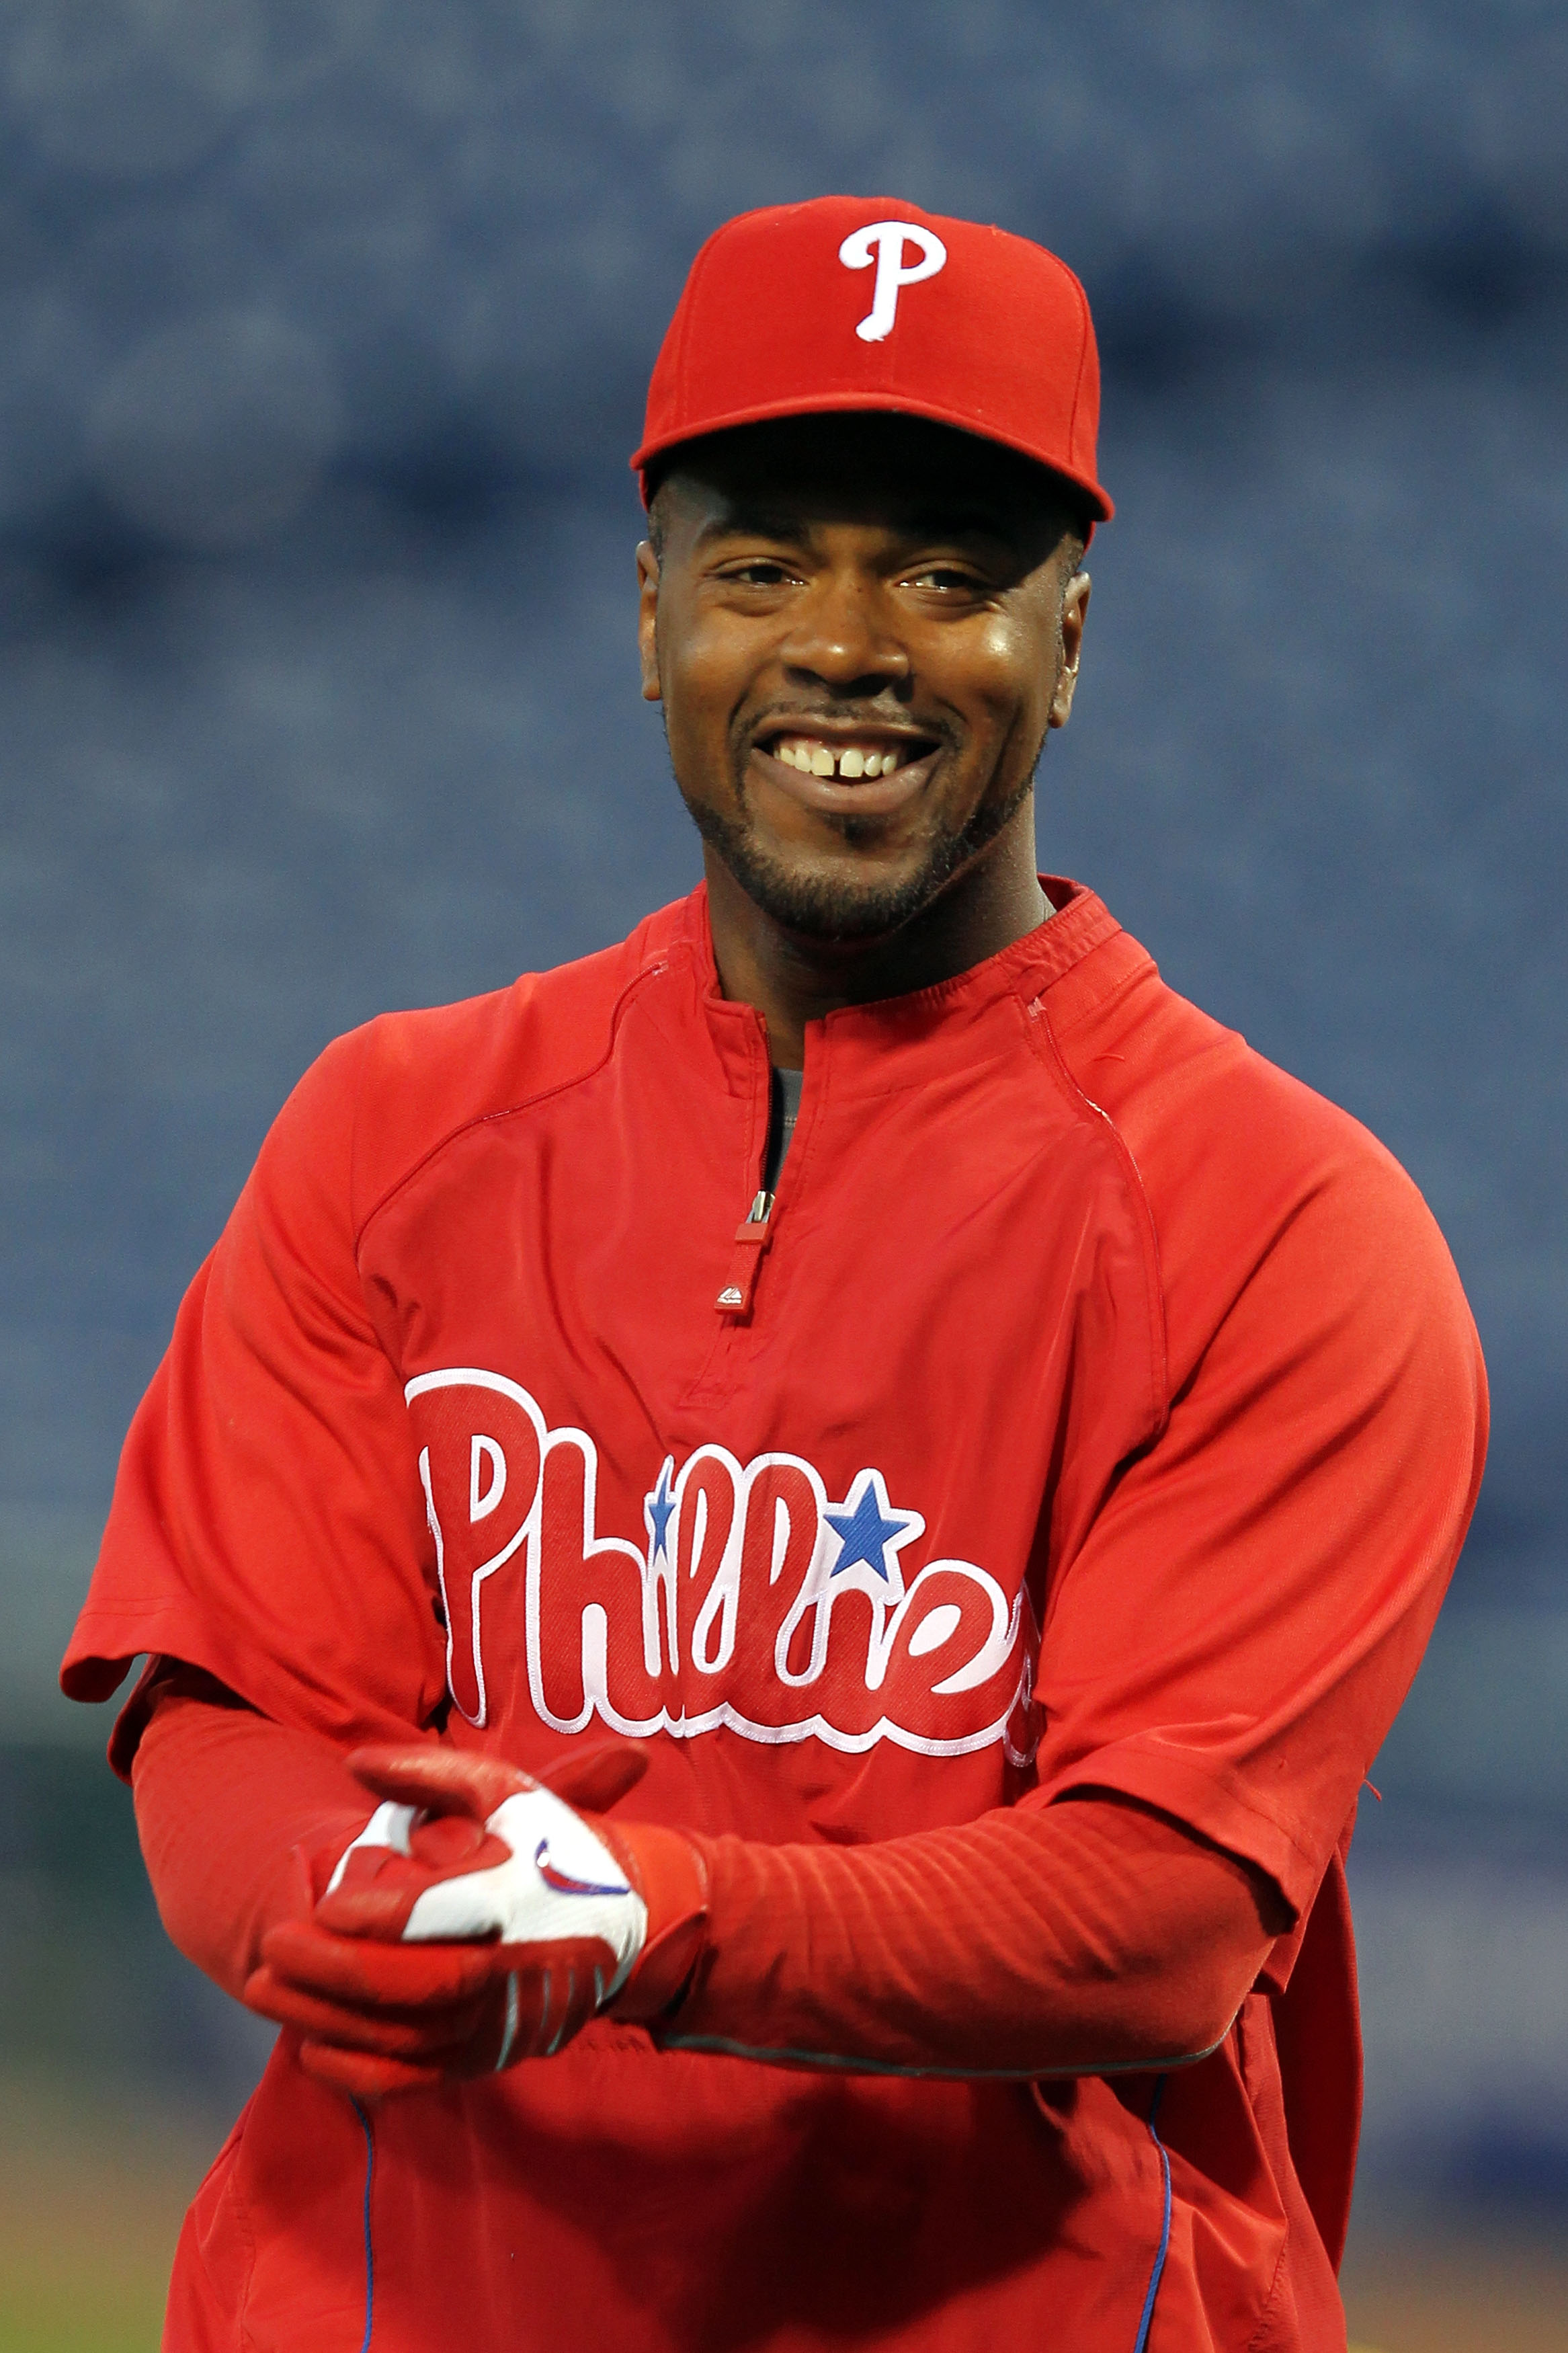 PHILADELPHIA - OCTOBER 23:  Jimmy Rollins #11 of the Philadelphia Phillies looks on during batting practice before Game Six of the NLCS during the 2010 MLB Playoffs at Citizens Bank Park on October 23, 2010 in Philadelphia, Pennsylvania.  (Photo by Al Bel